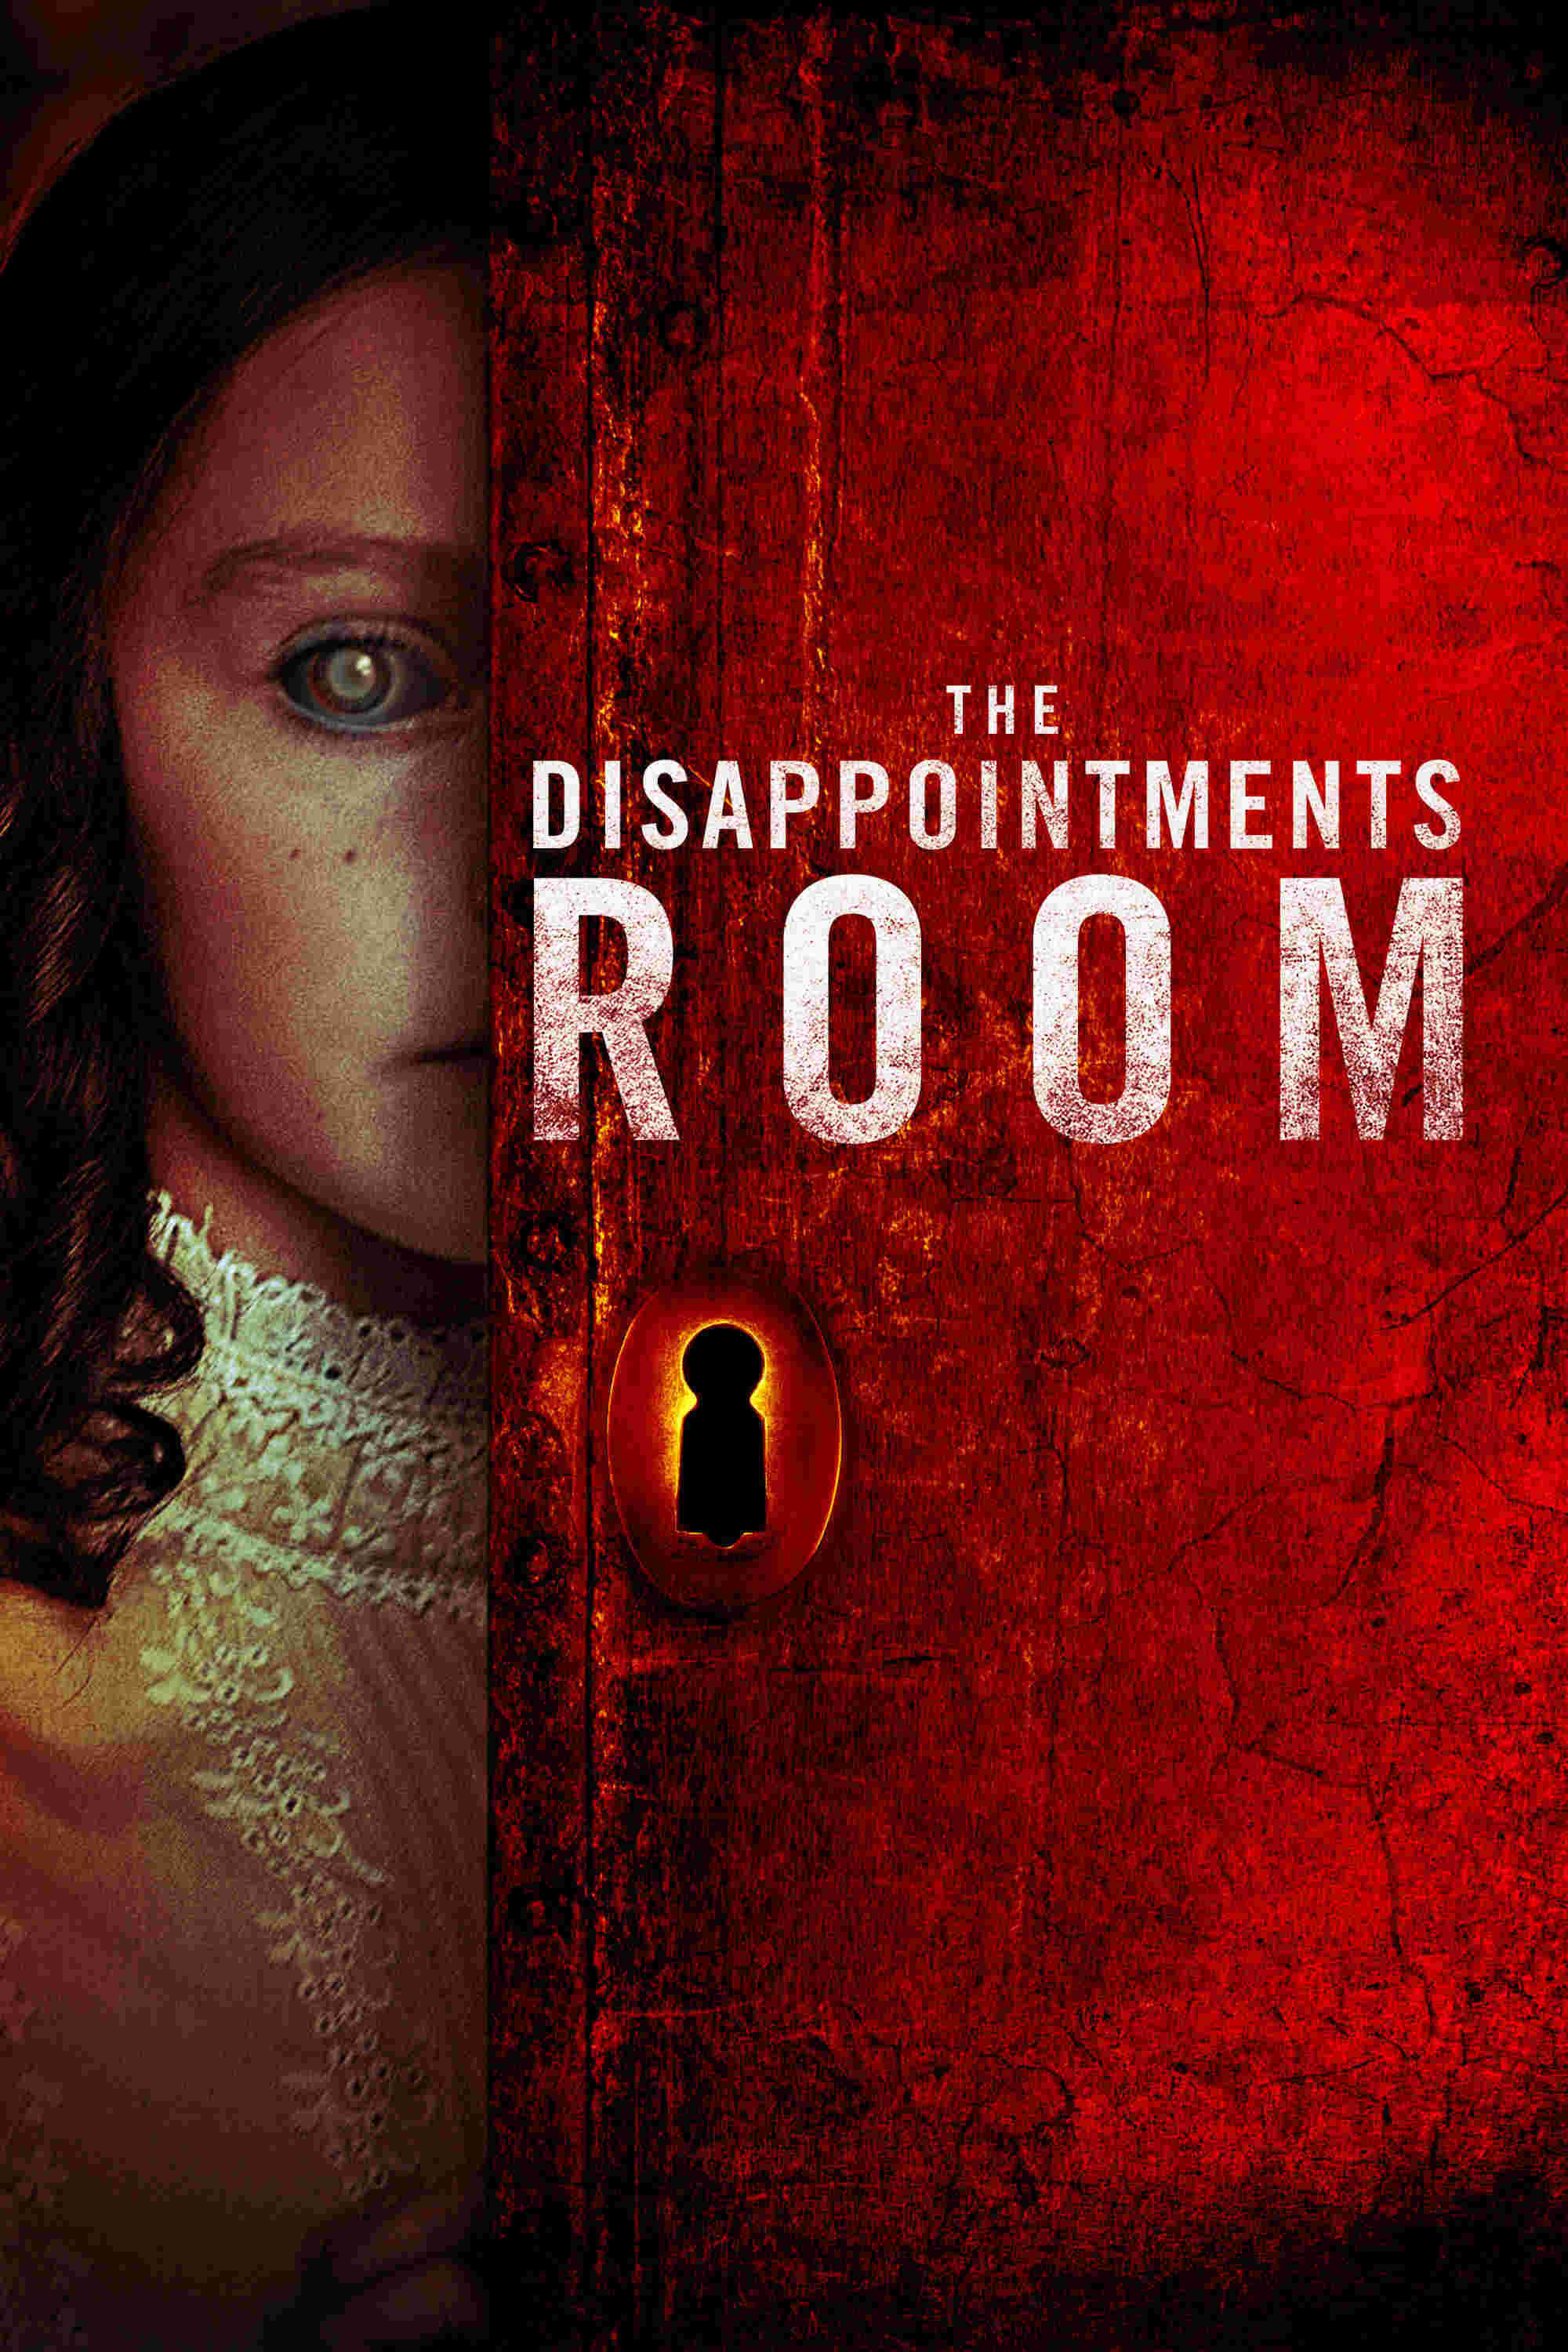 The Disappointments Room (2016) Kate Beckinsale